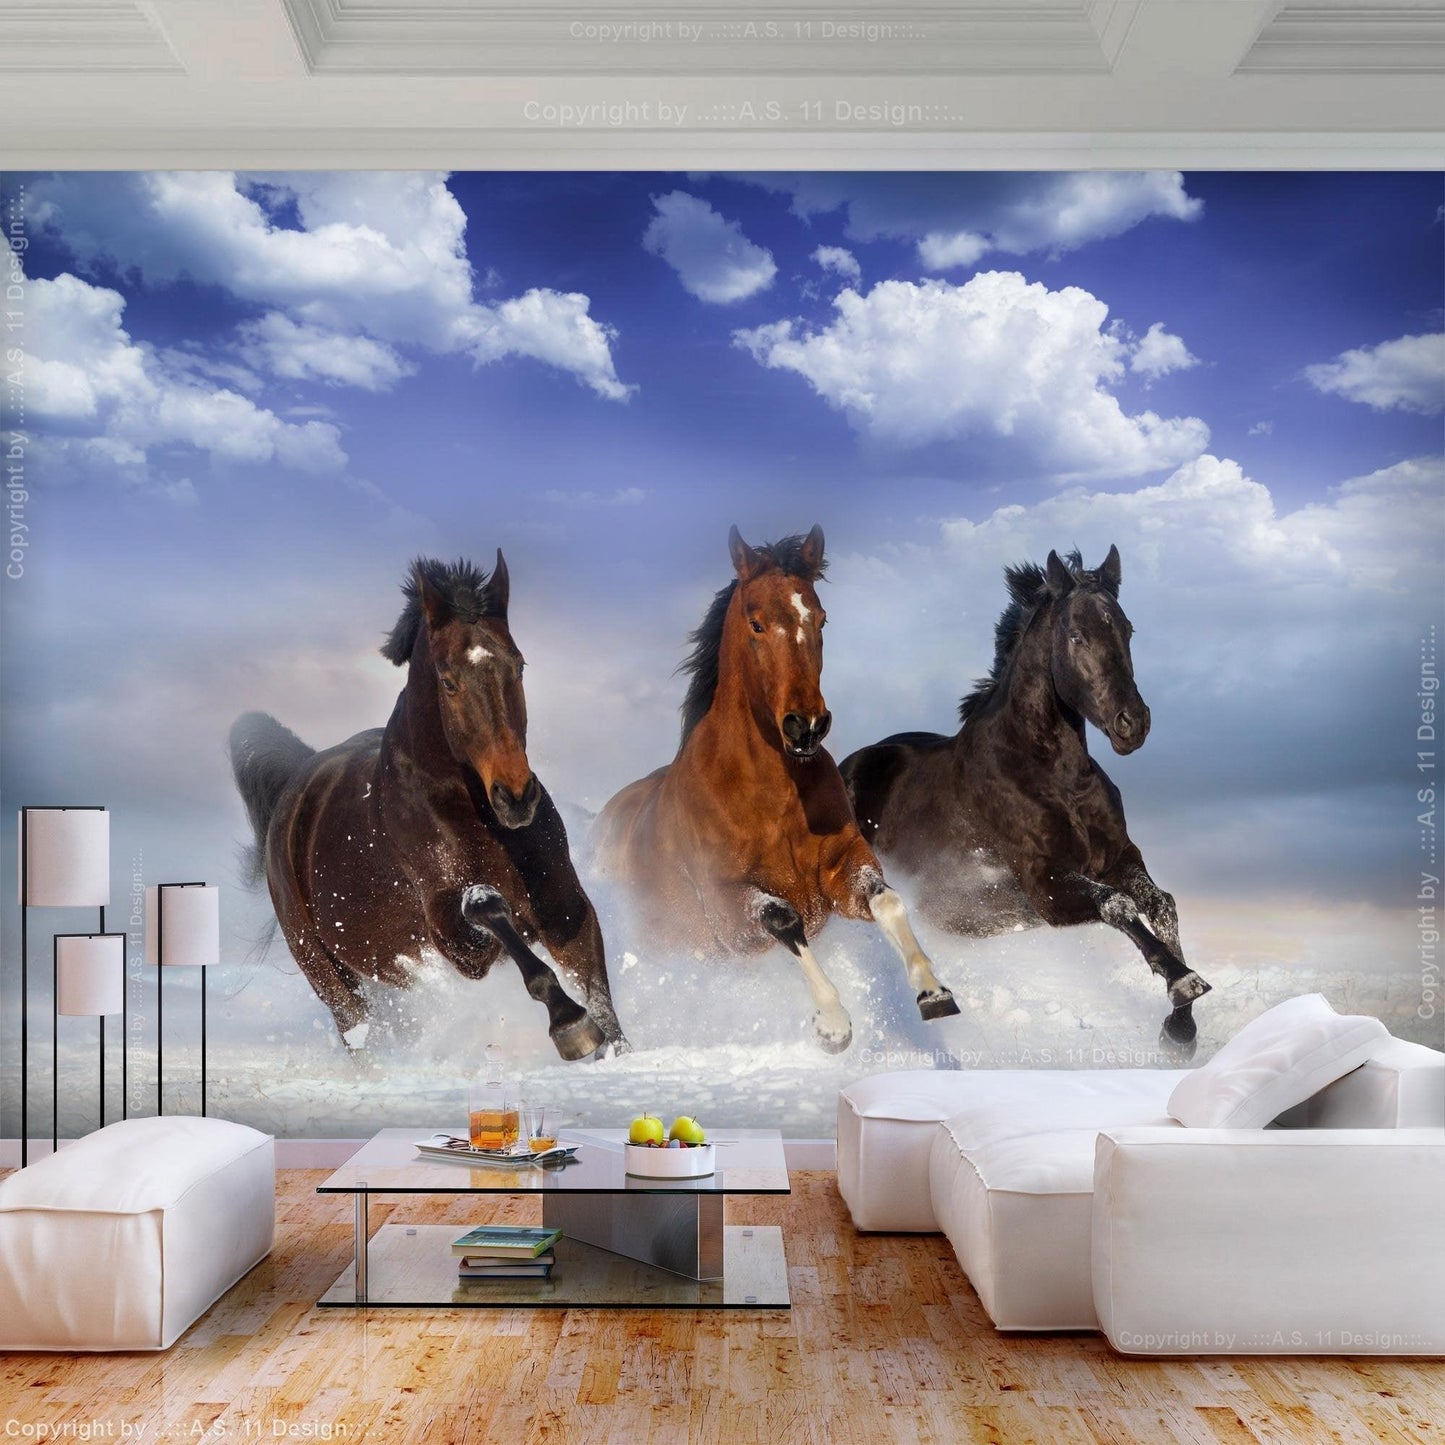 Peel and stick wall mural - Horses in the Snow - www.trendingbestsellers.com